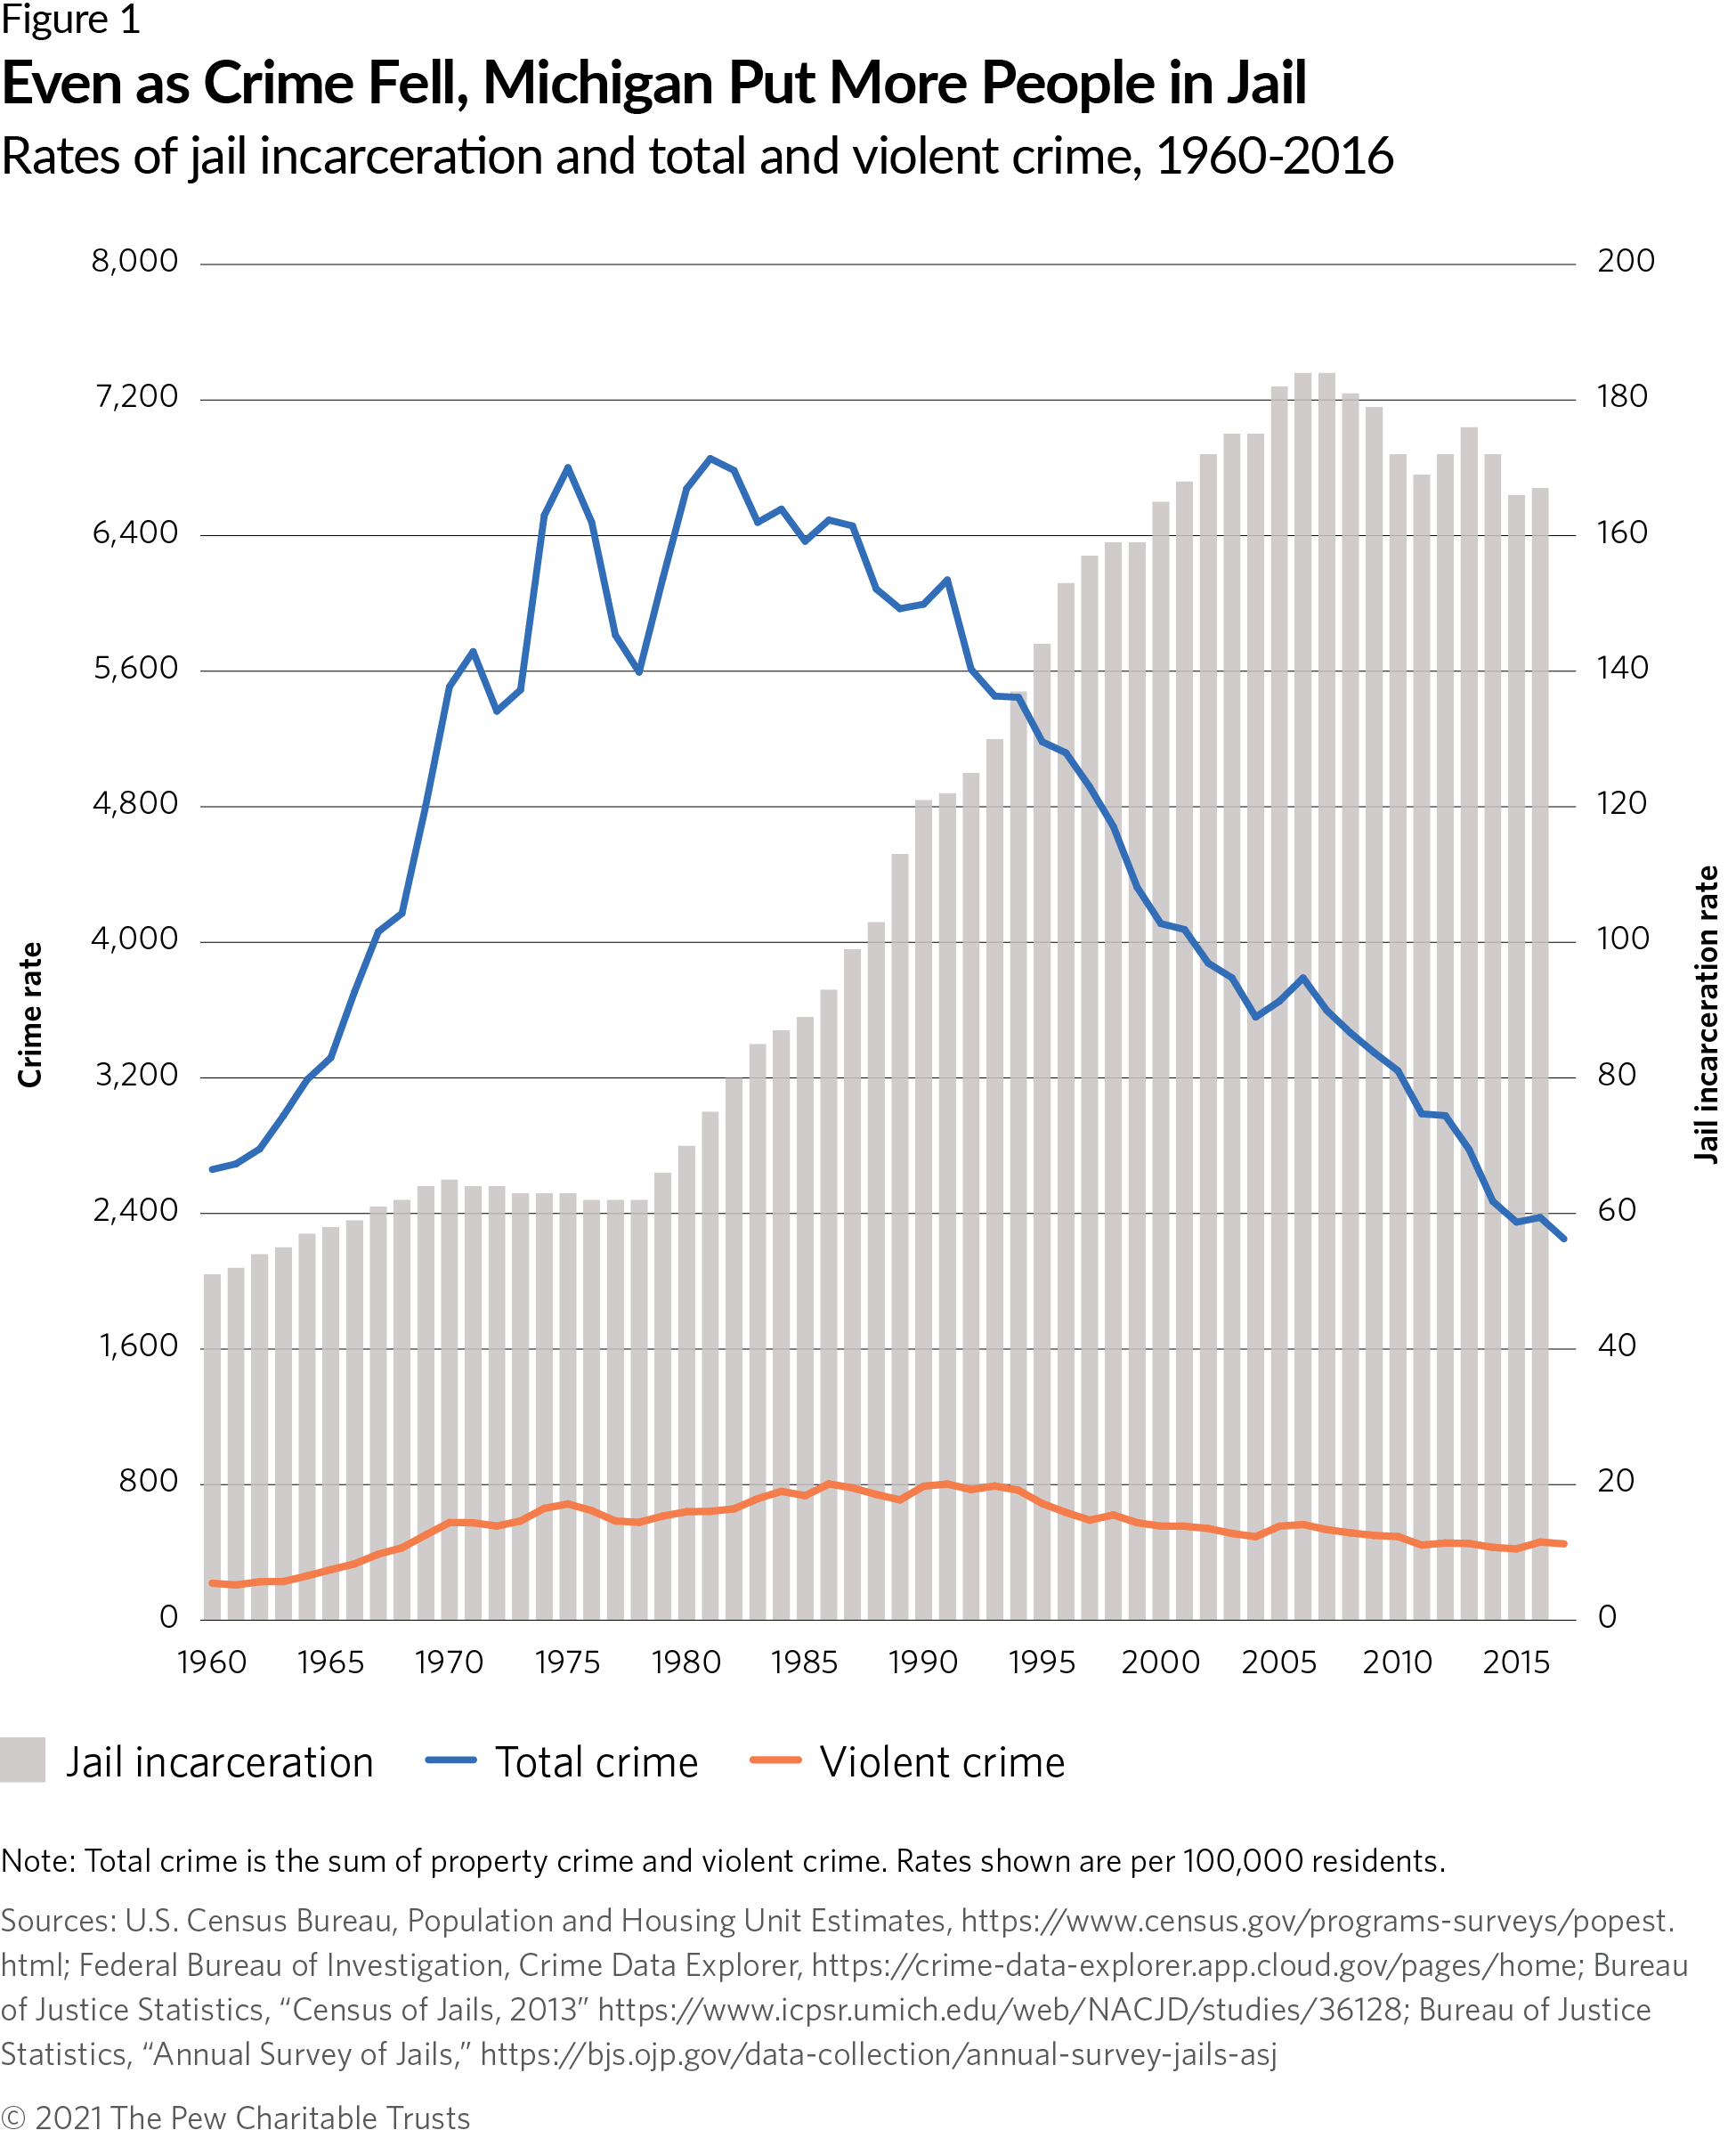 Even as Crime Fell, Michigan Put More People in Jail Rates of jail incarceration and total and violent crime, 1960-2016